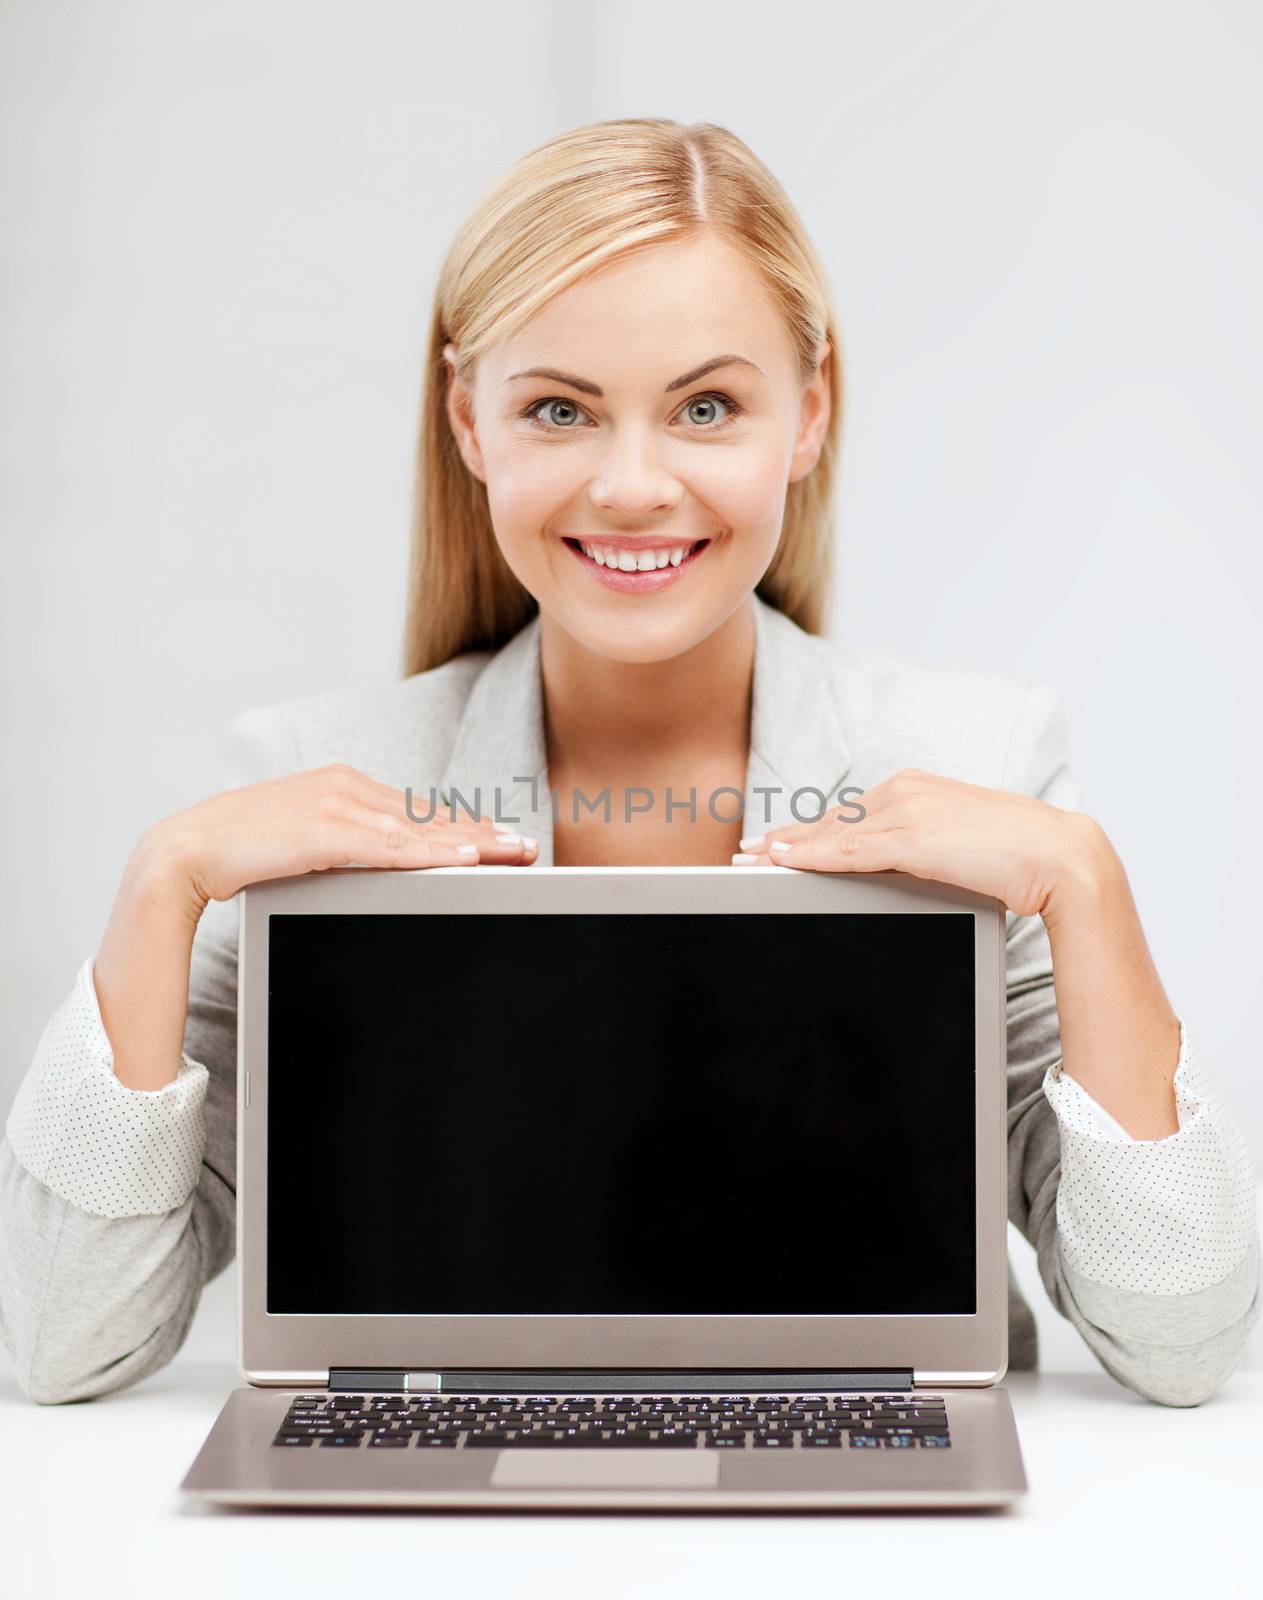 education,business, technology and internet concept - smiling woman with laptop pc